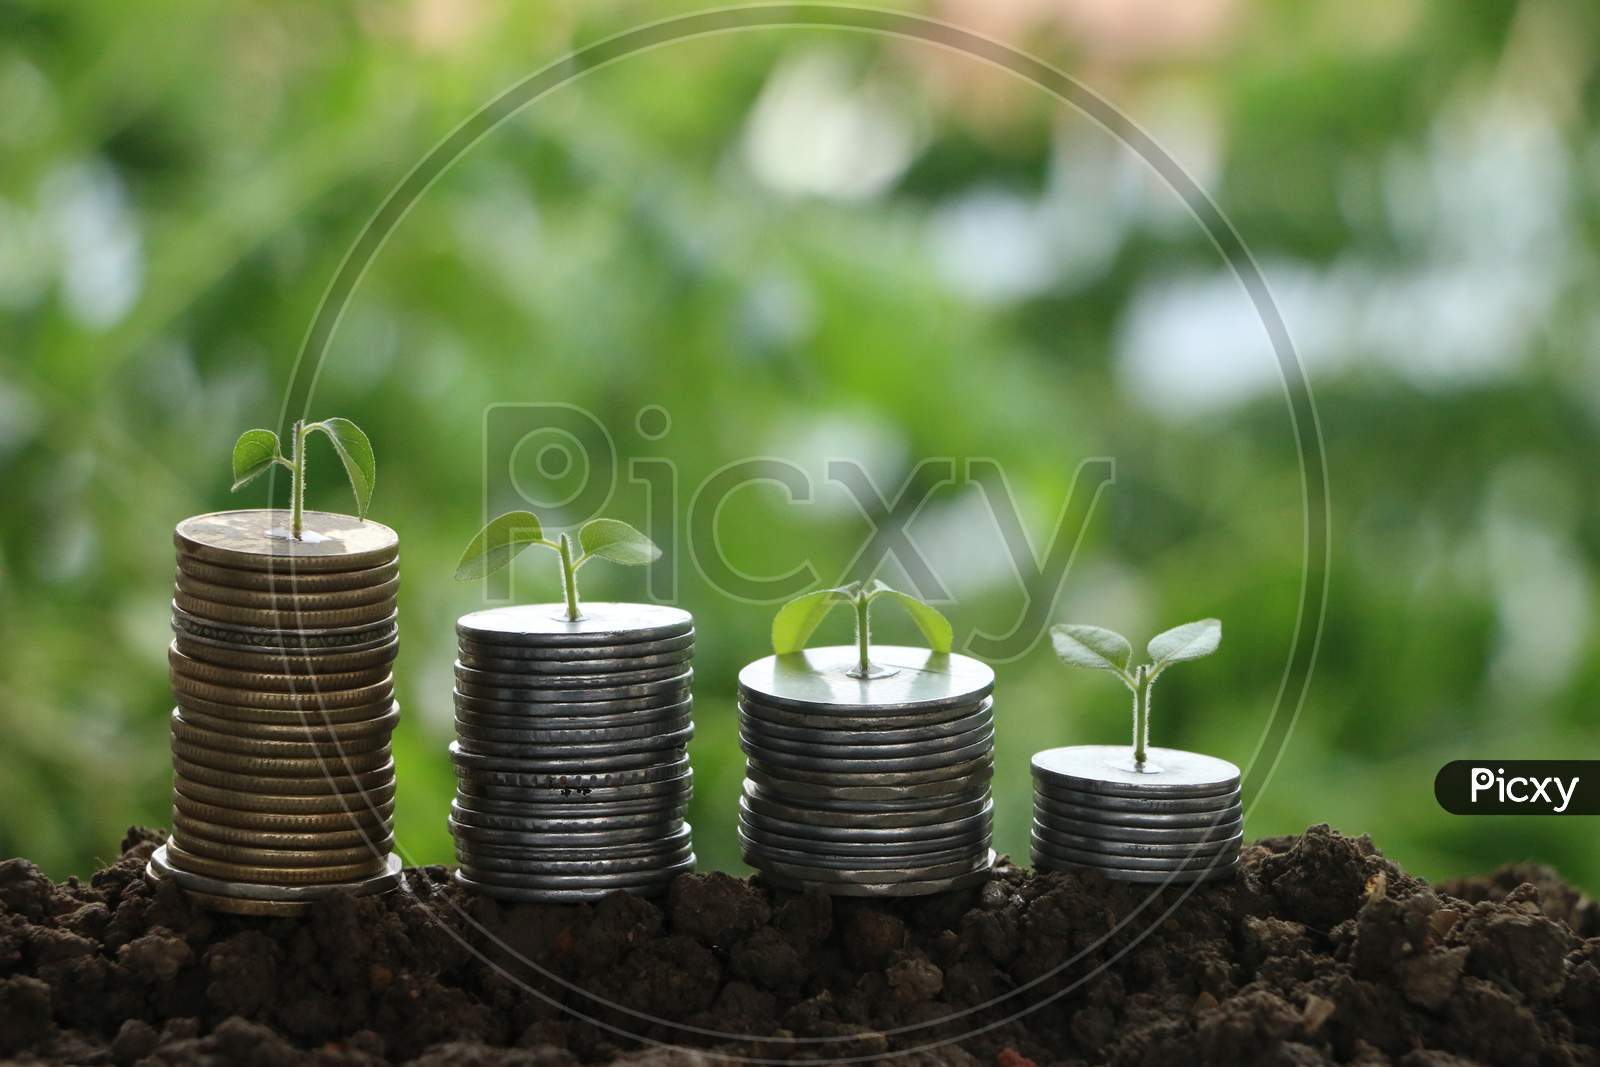 Coins And Plants Are Grown On A Pile Of Coins For Finance And Banking. The Idea Of Saving Money And Increasing Finances.